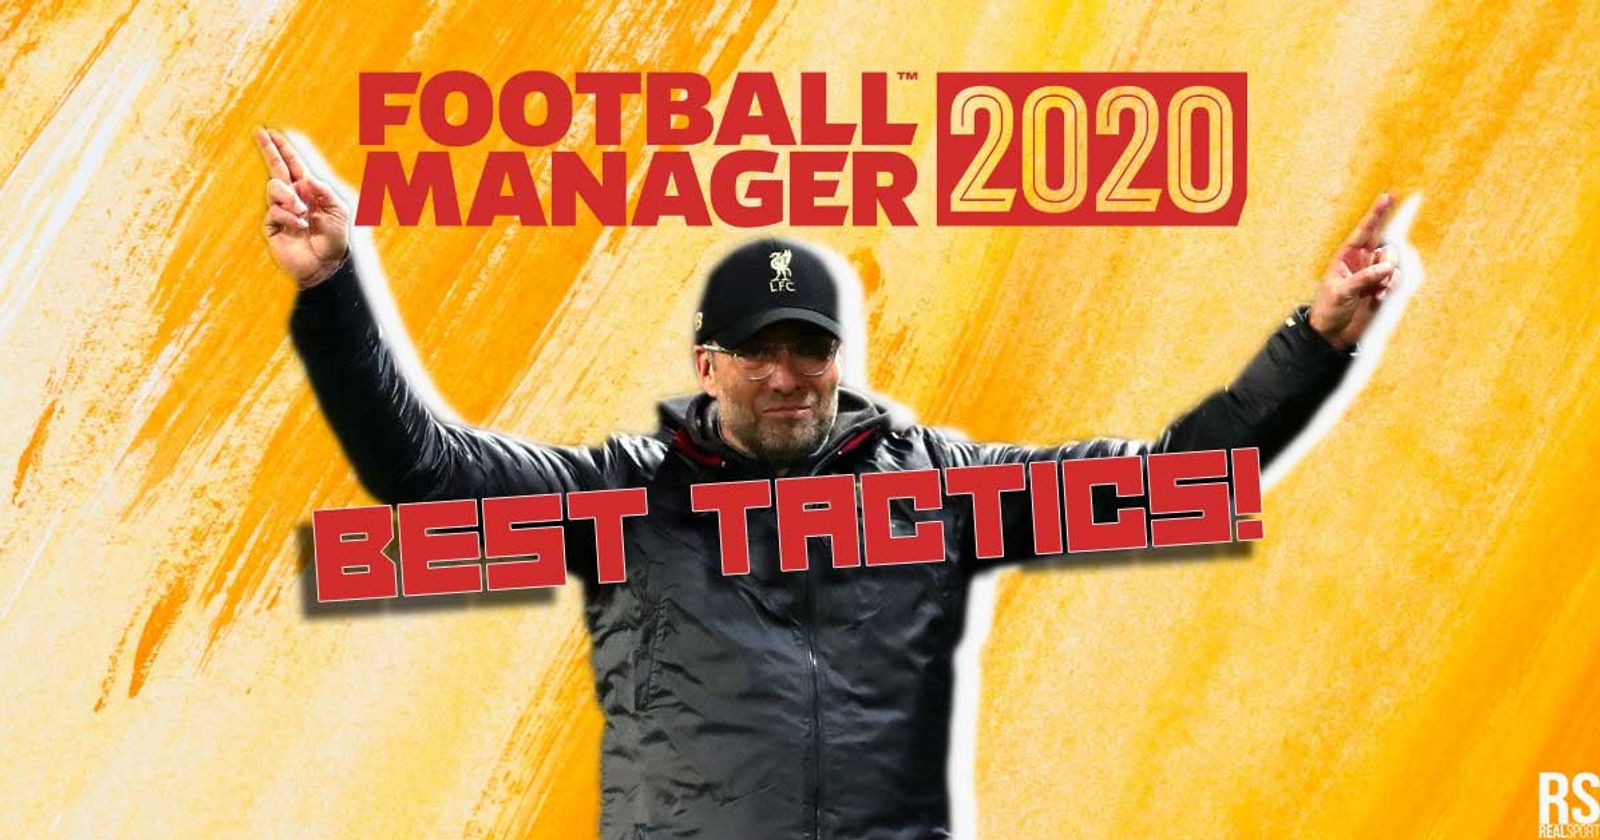 FM Guide: How To Make Football Manager Look Pretty – Football Manager Addict